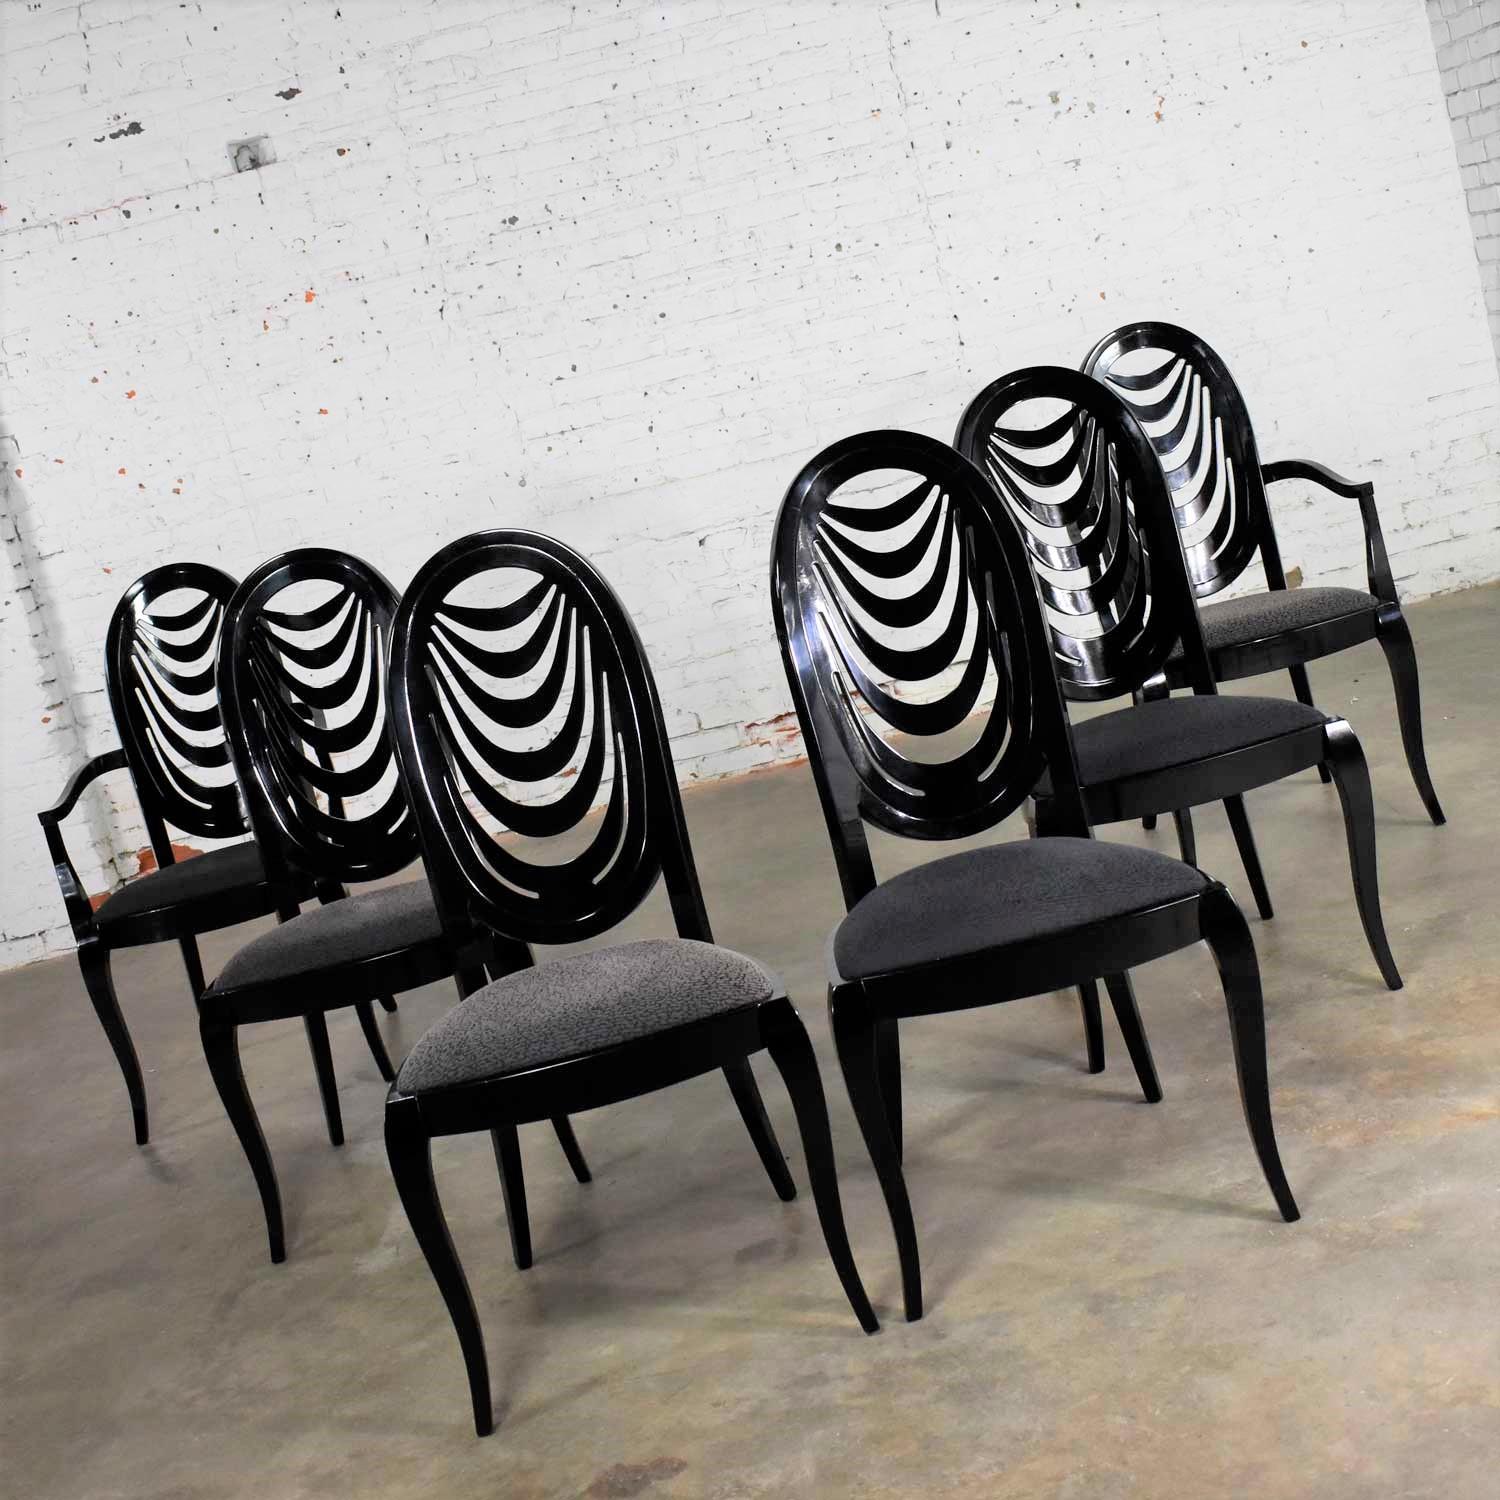 Hollywood Regency Black Lacquer Oval Drape Back Dining Chairs, Pietro Costantini for Ello Set of 6